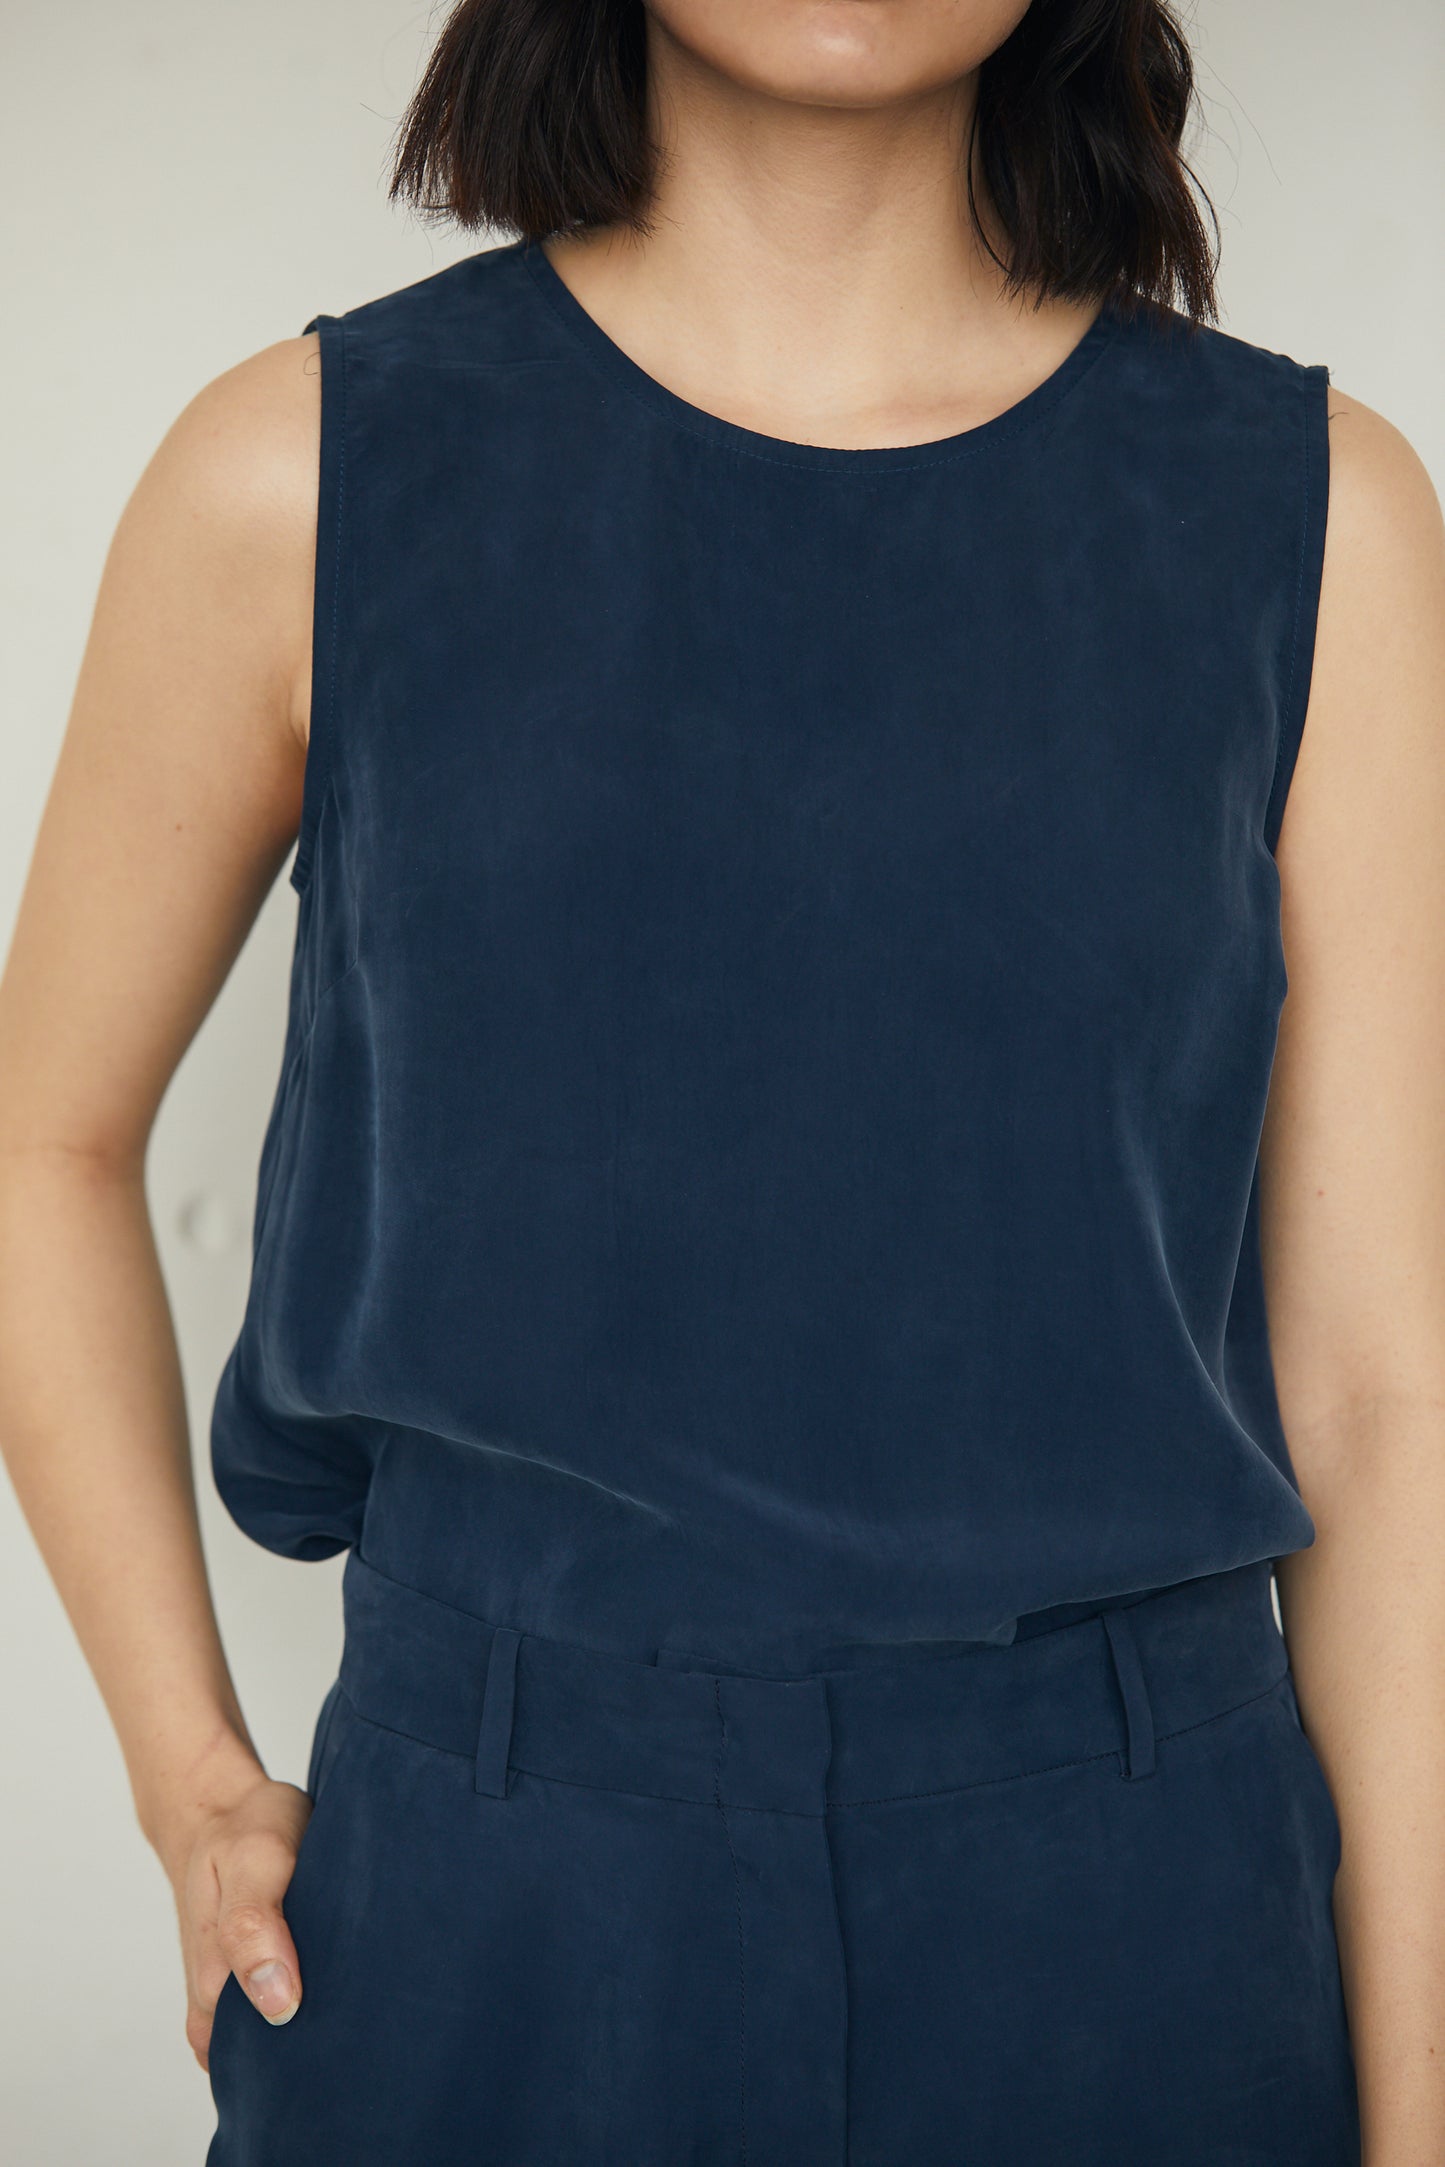 Shell Top Washed Cupro Top Navy